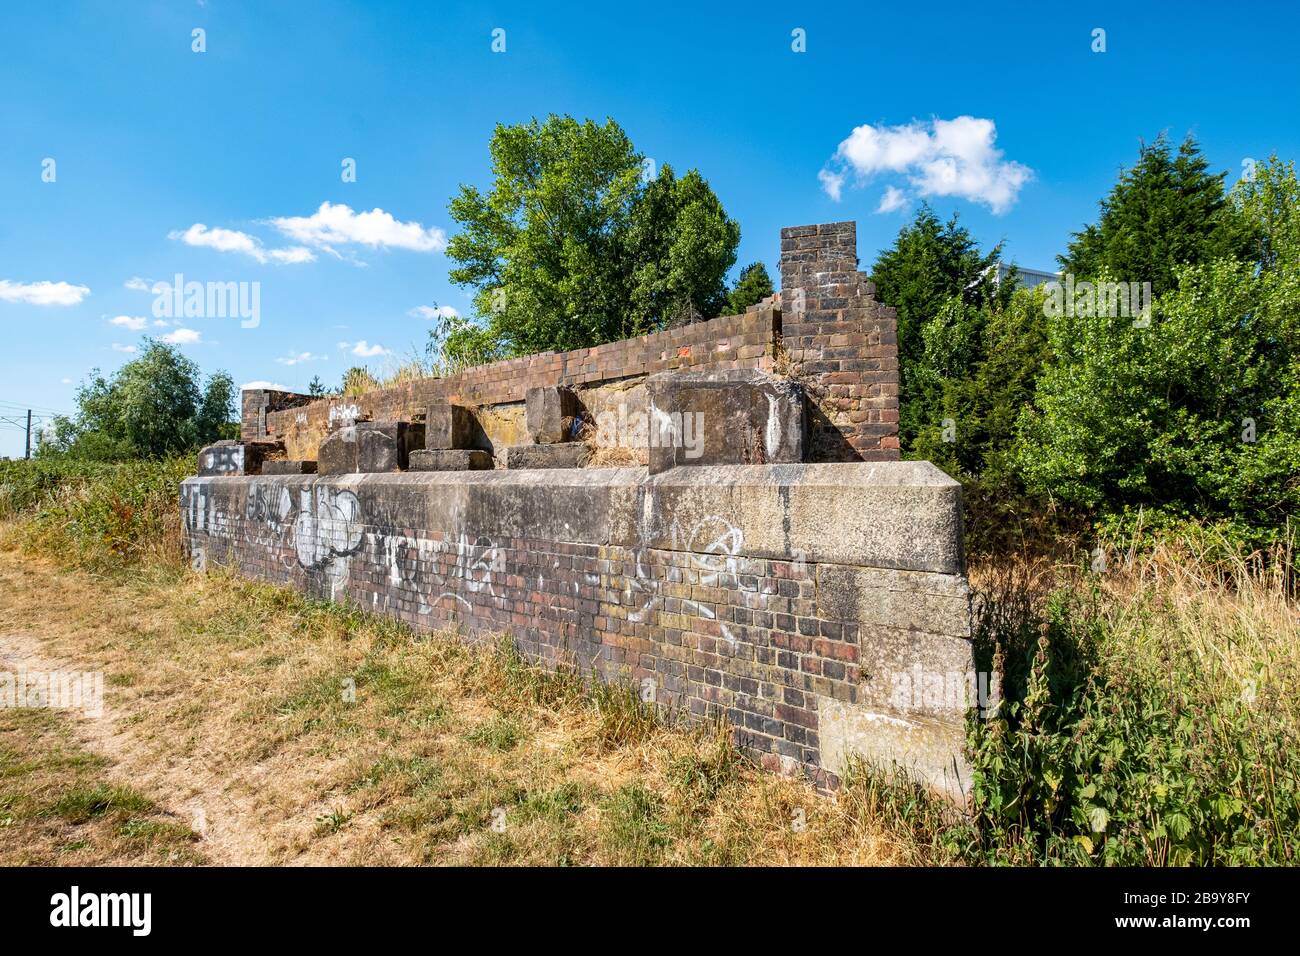 Remains of bridge foundation on the Trent and Mersey canal in Moston Sandbach Cheshire UK Stock Photo